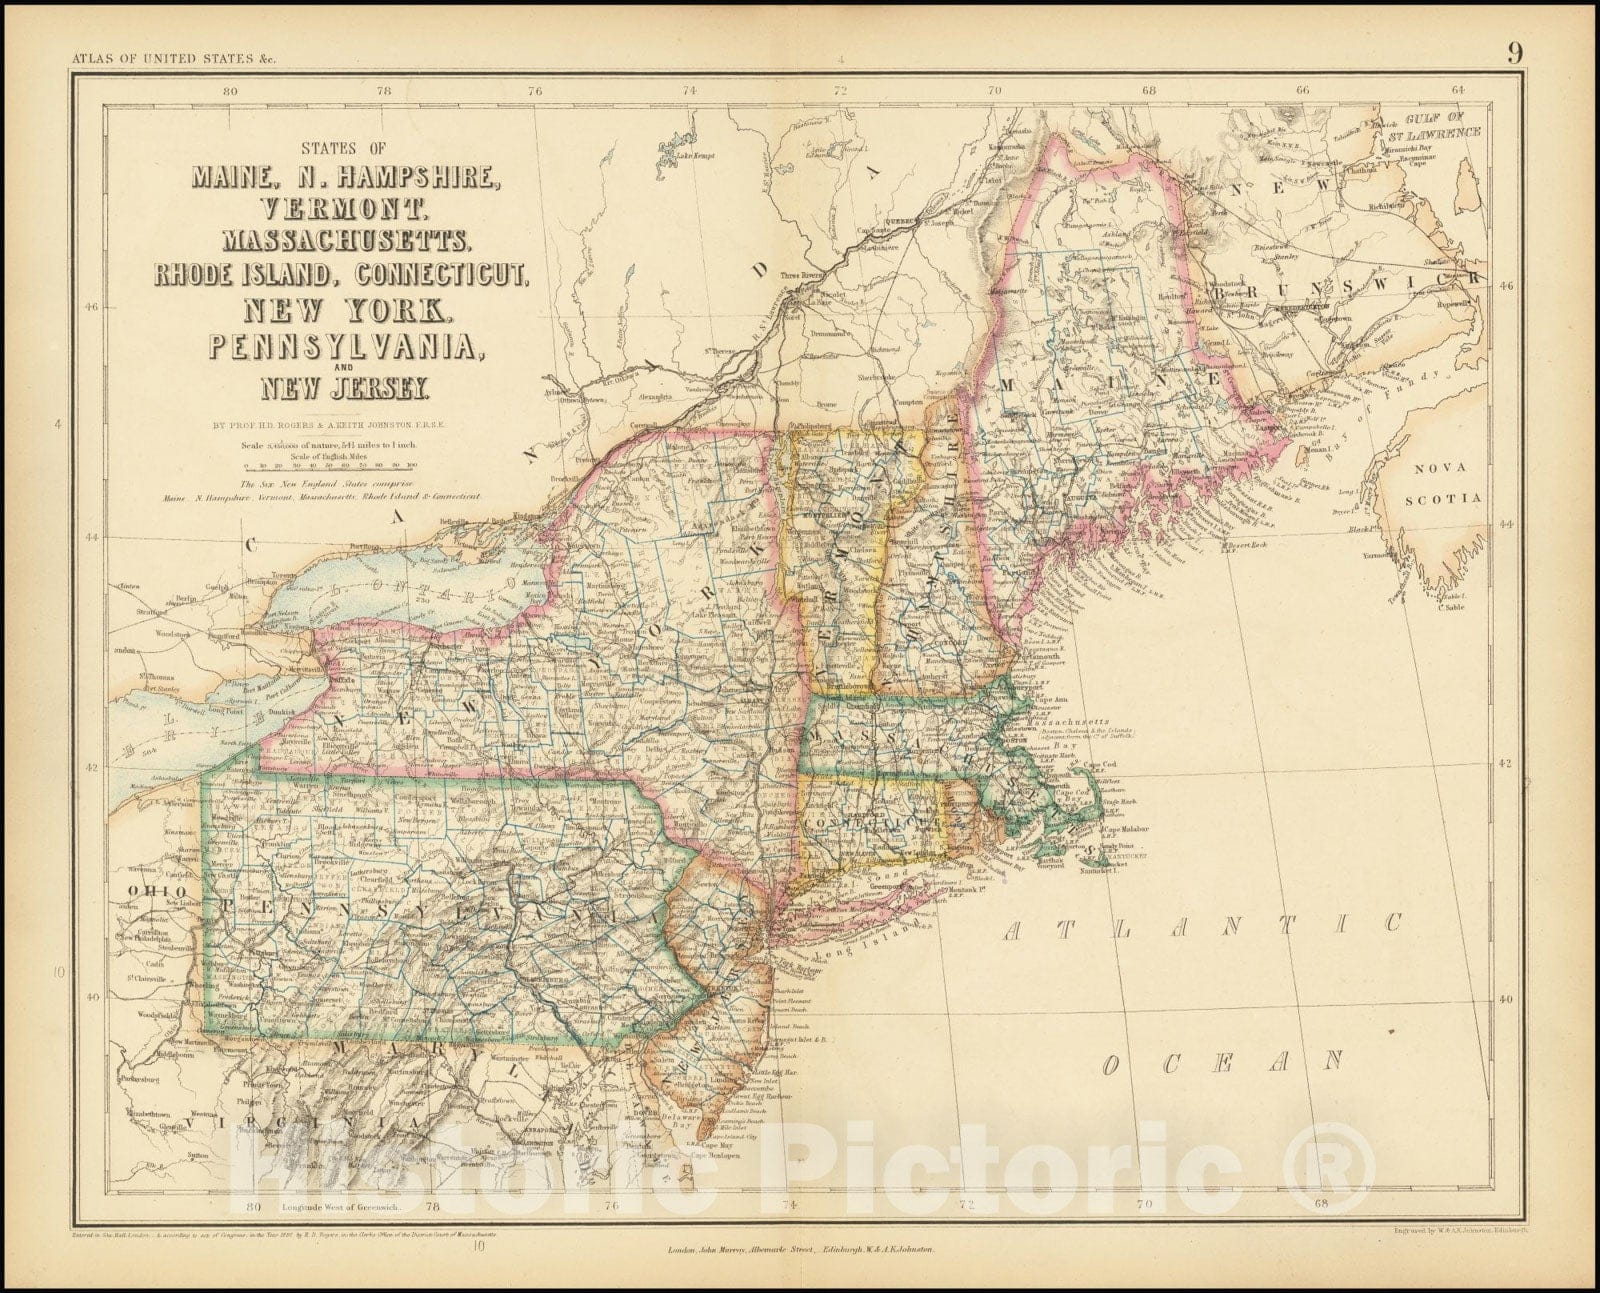 Historic Map : States of Maine, N. Hampshire, Vermont, Massachusettes, Rhode Island, Connecticut, New York, Pennsylvania, and New Jersey, 1857, Vintage Wall Art